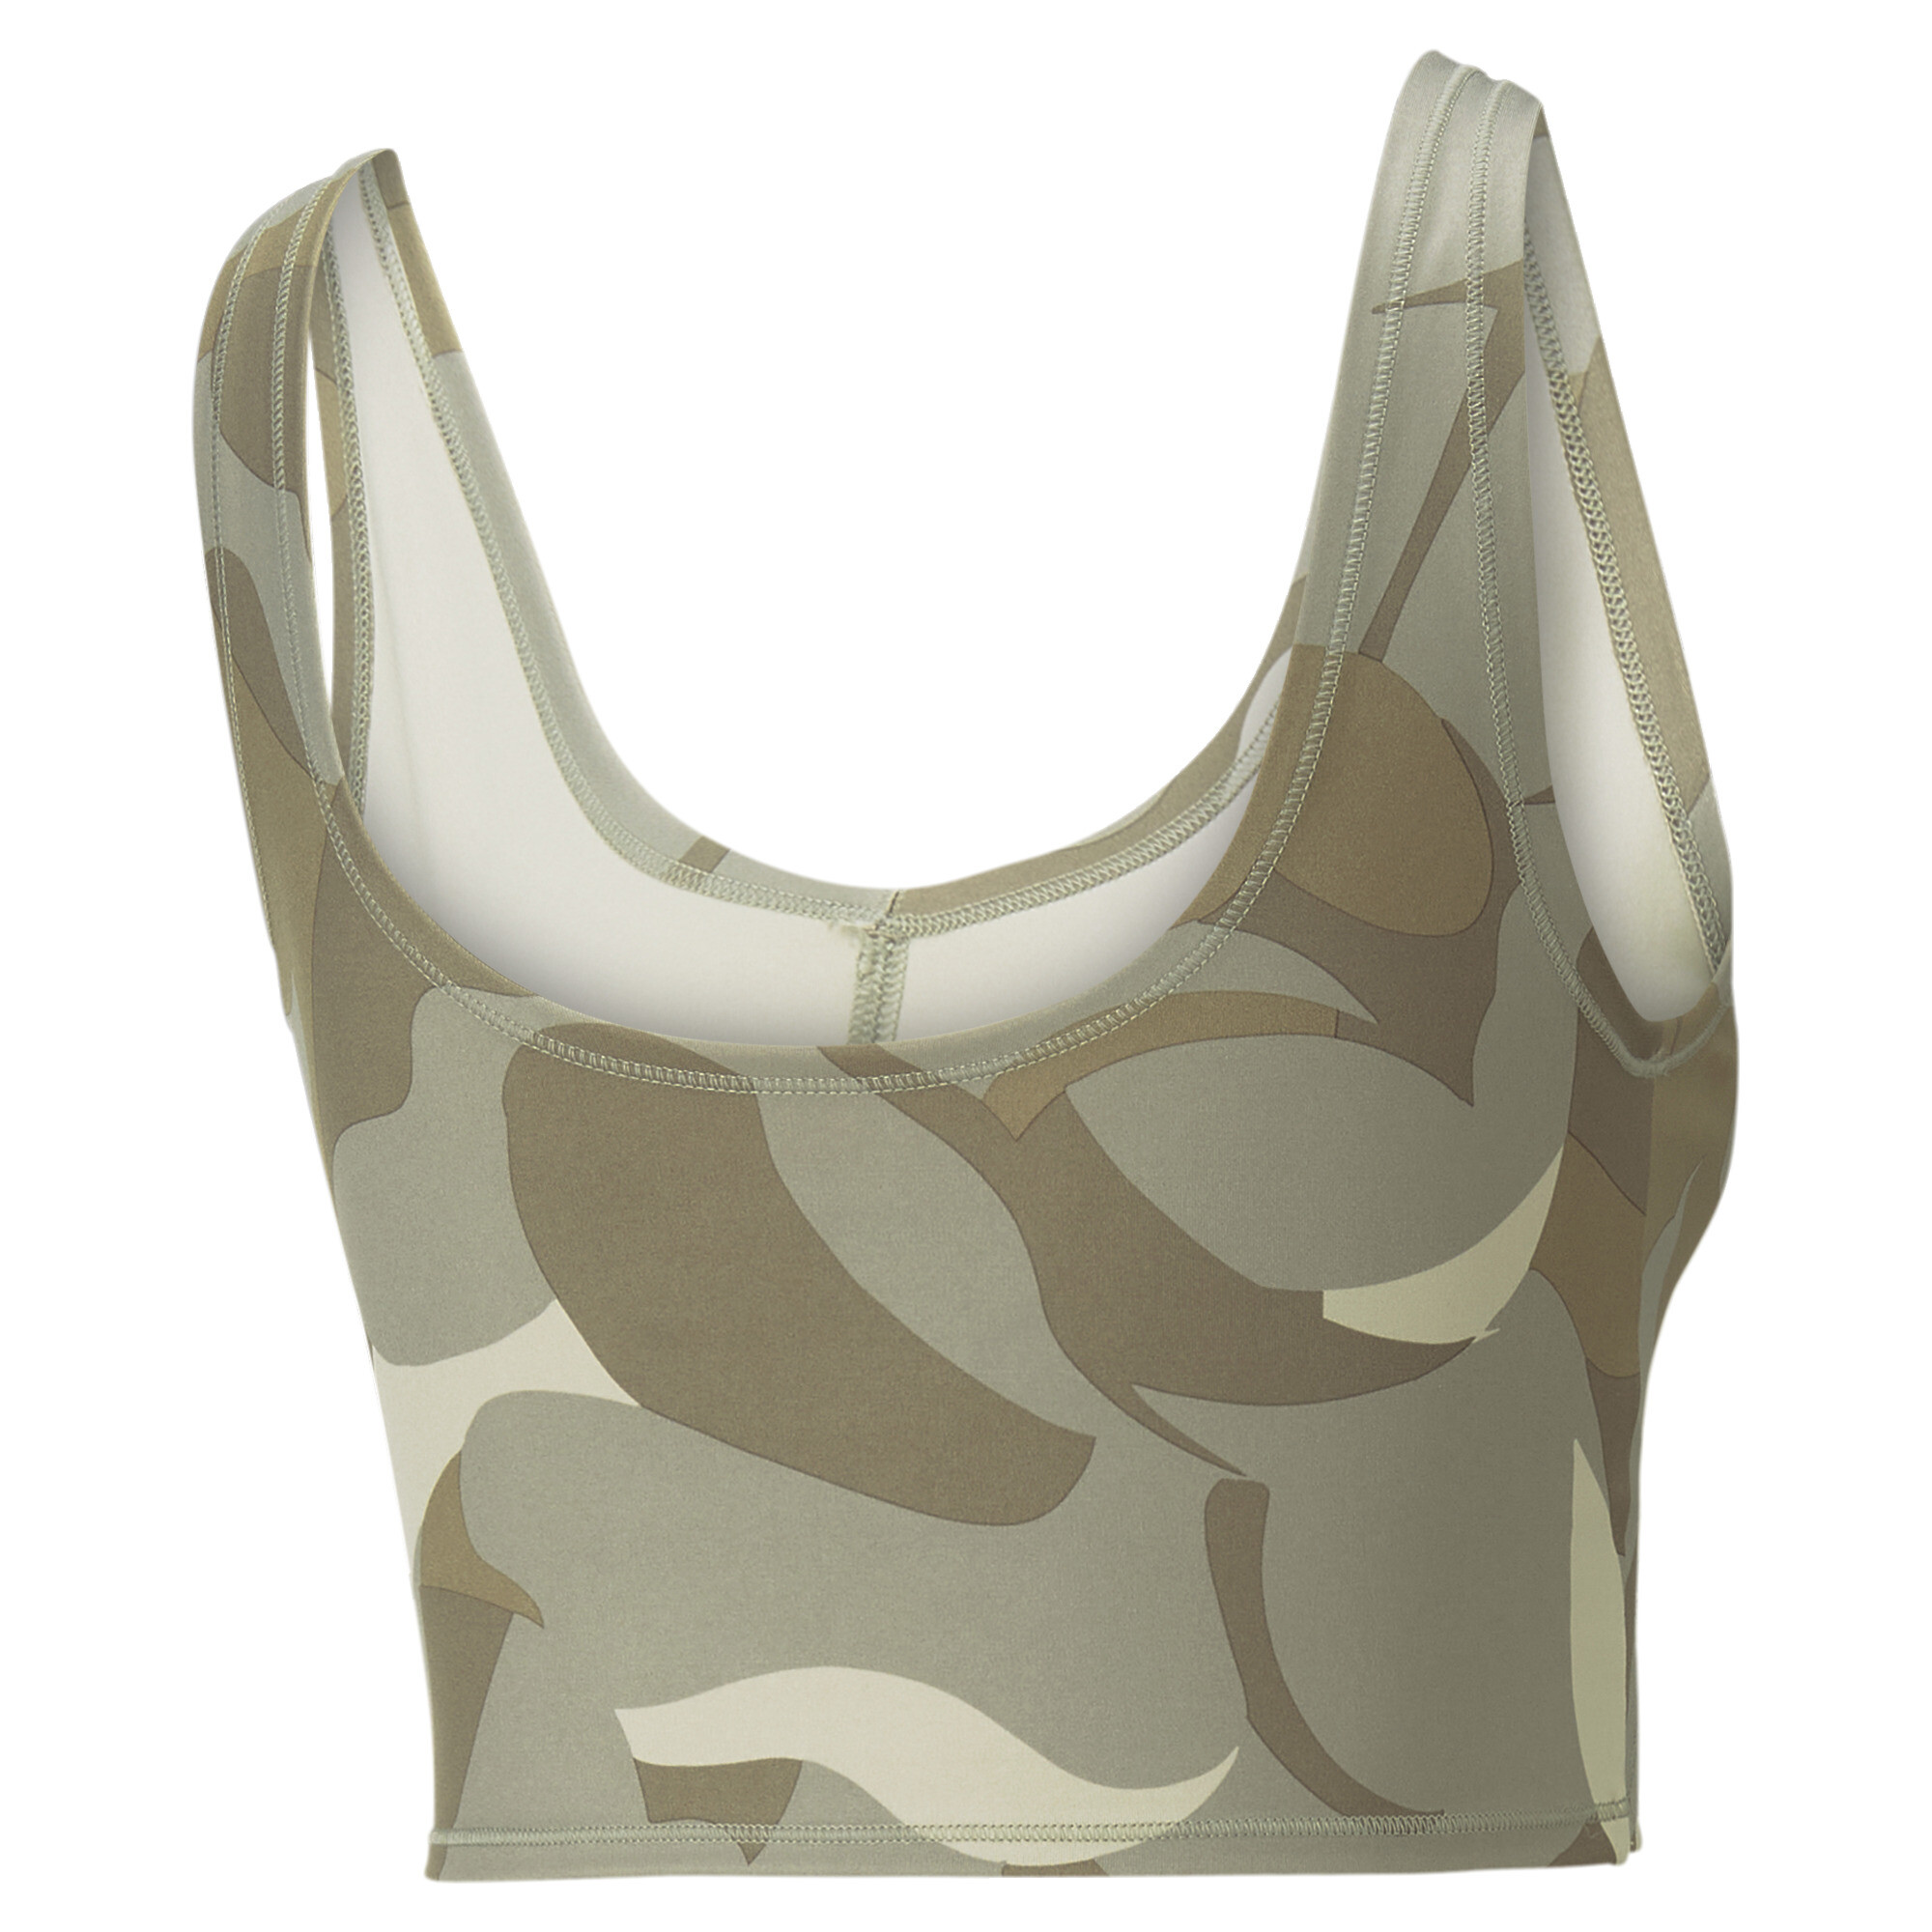 Women's Puma Studio Printed Cropped Training Top, Beige, Size L, Clothing